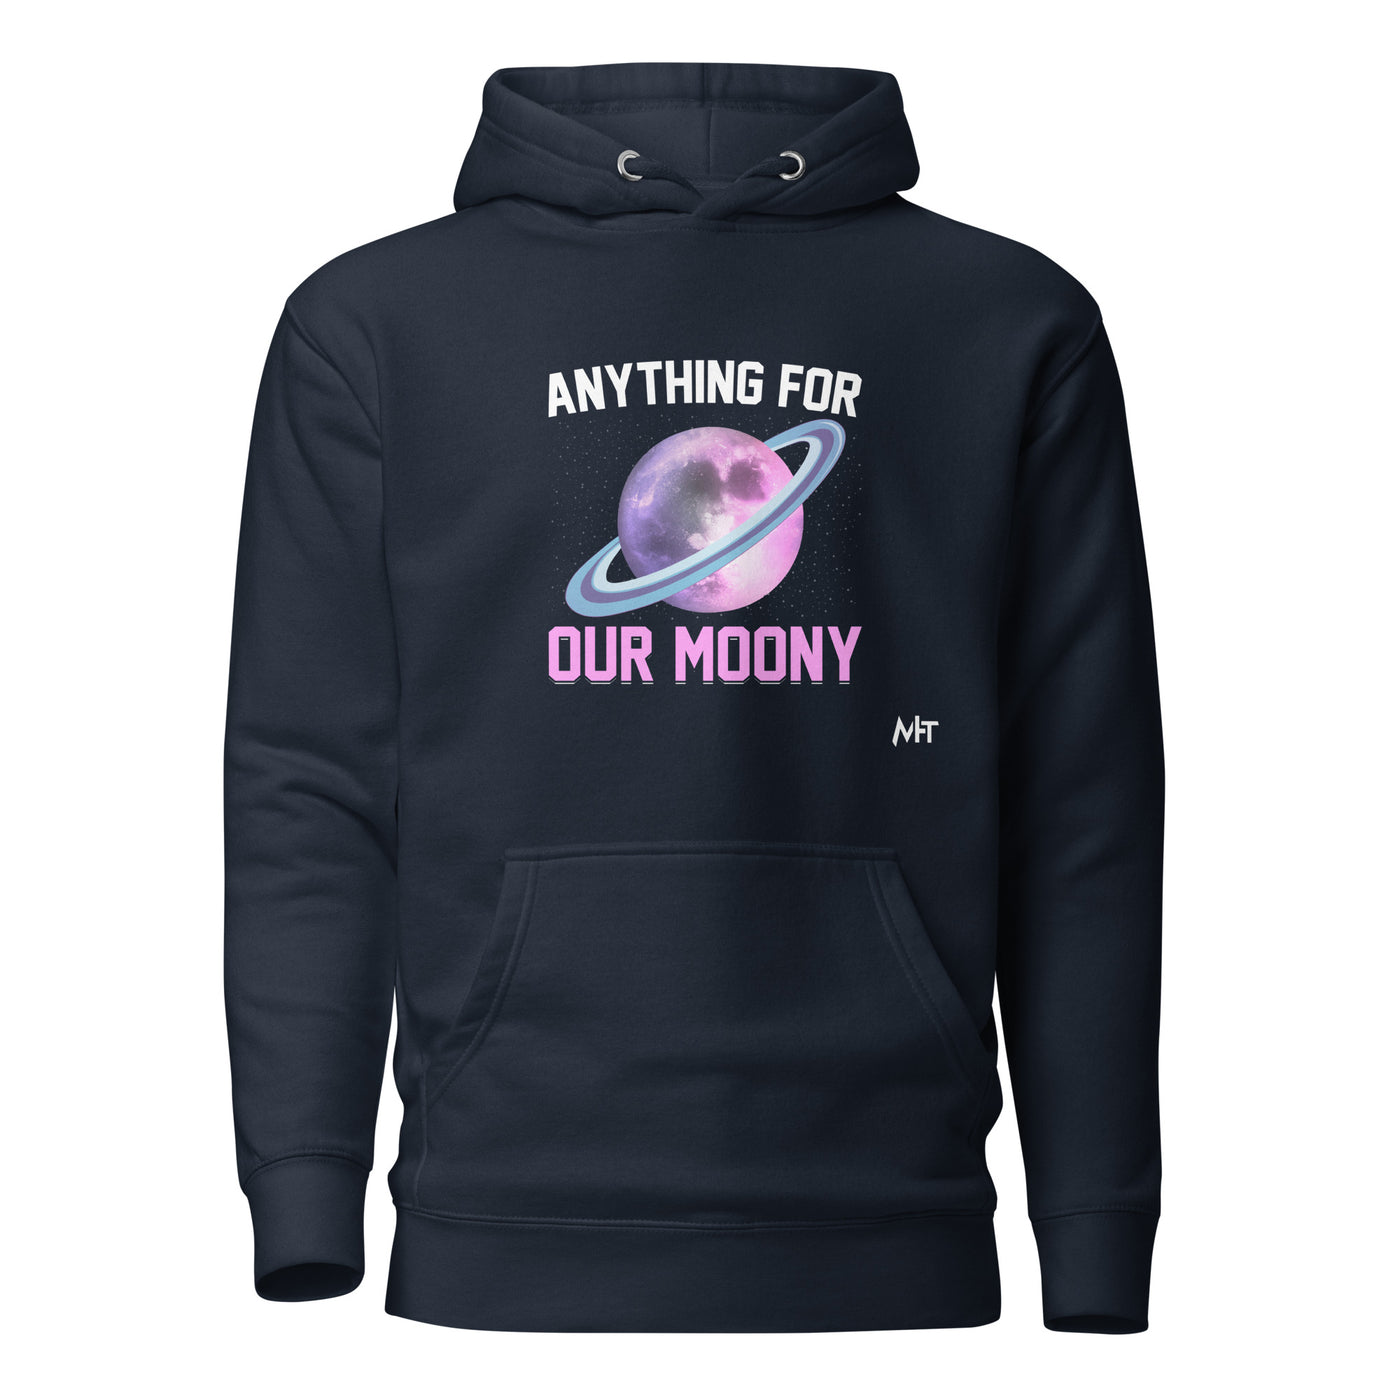 Anything for our moony - Unisex Hoodie